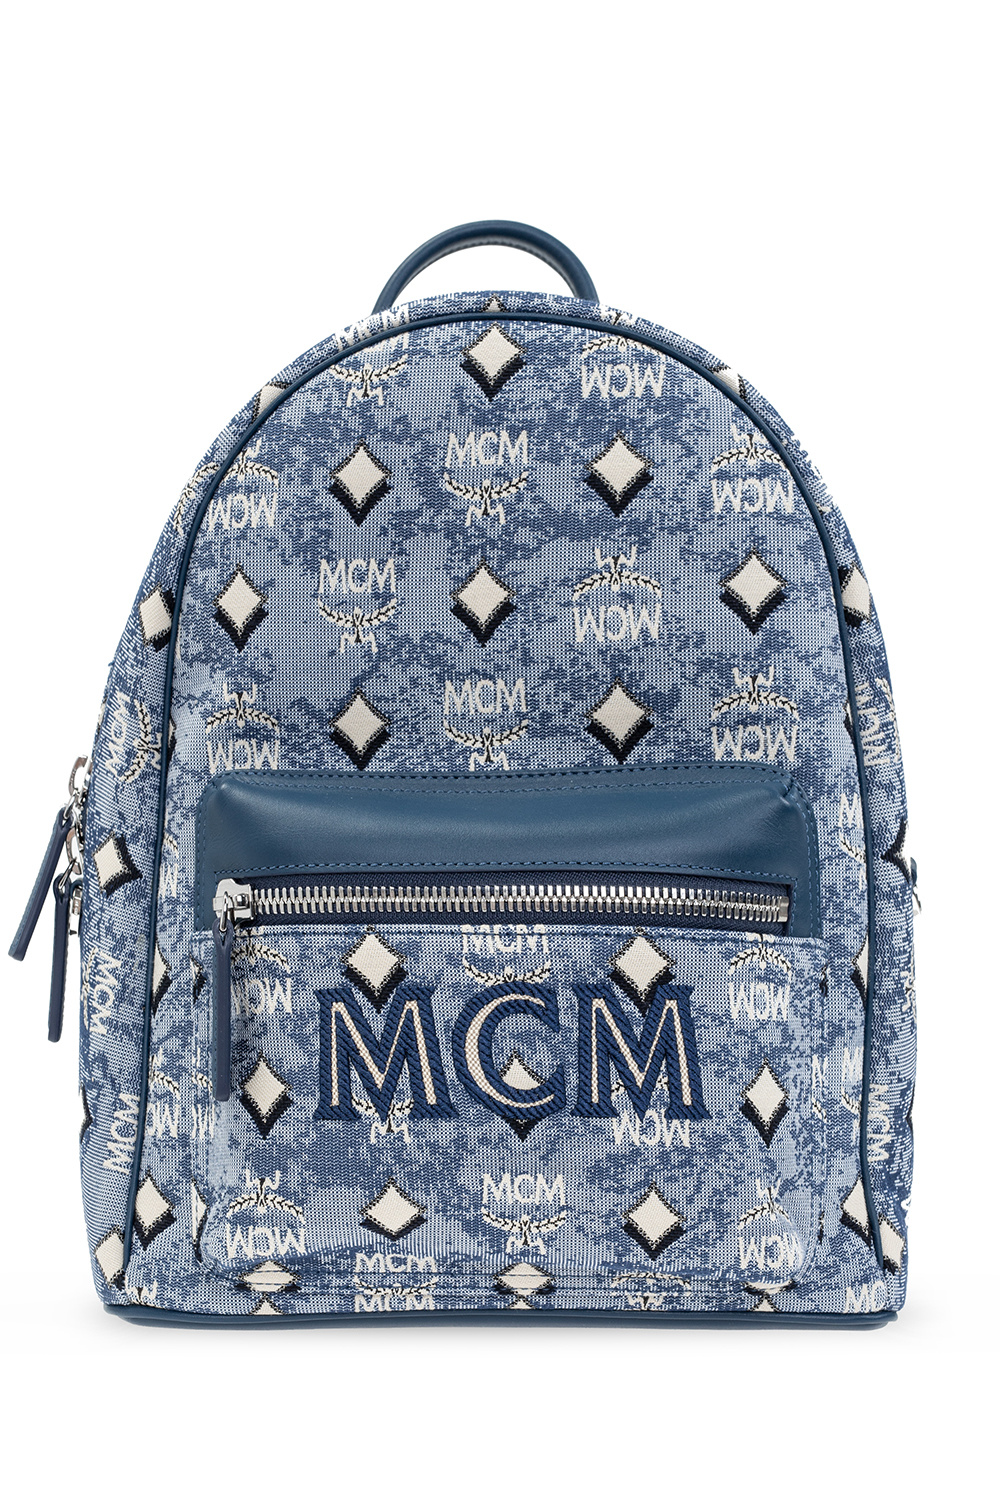 MCM product eng 1028173 Puma Deck Backpack